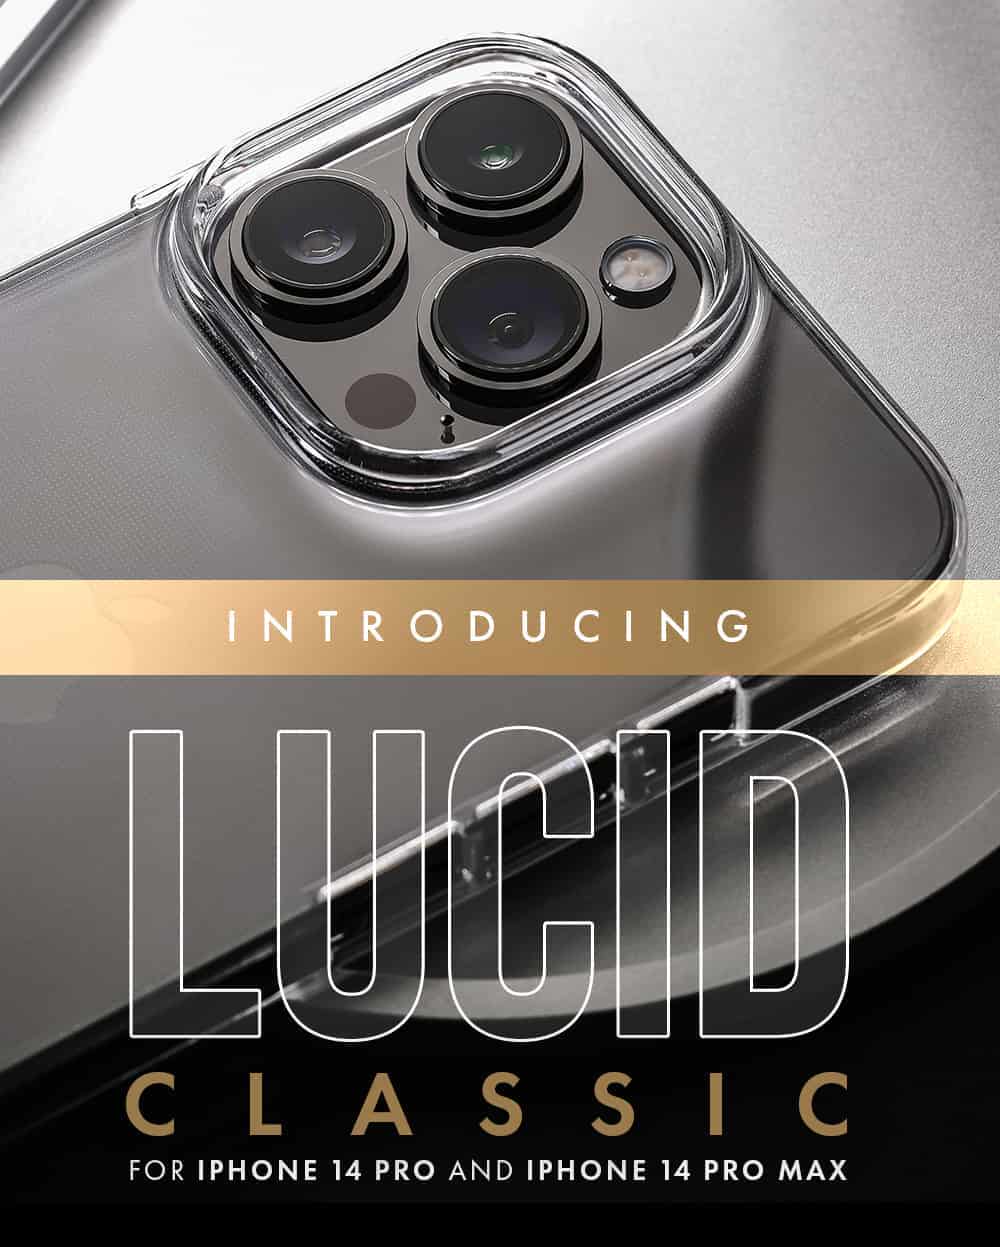 INTRODUCING LUCID CLASSIC FOR IPHONE 14 PRO AND IPHONE 14 PRO MAX